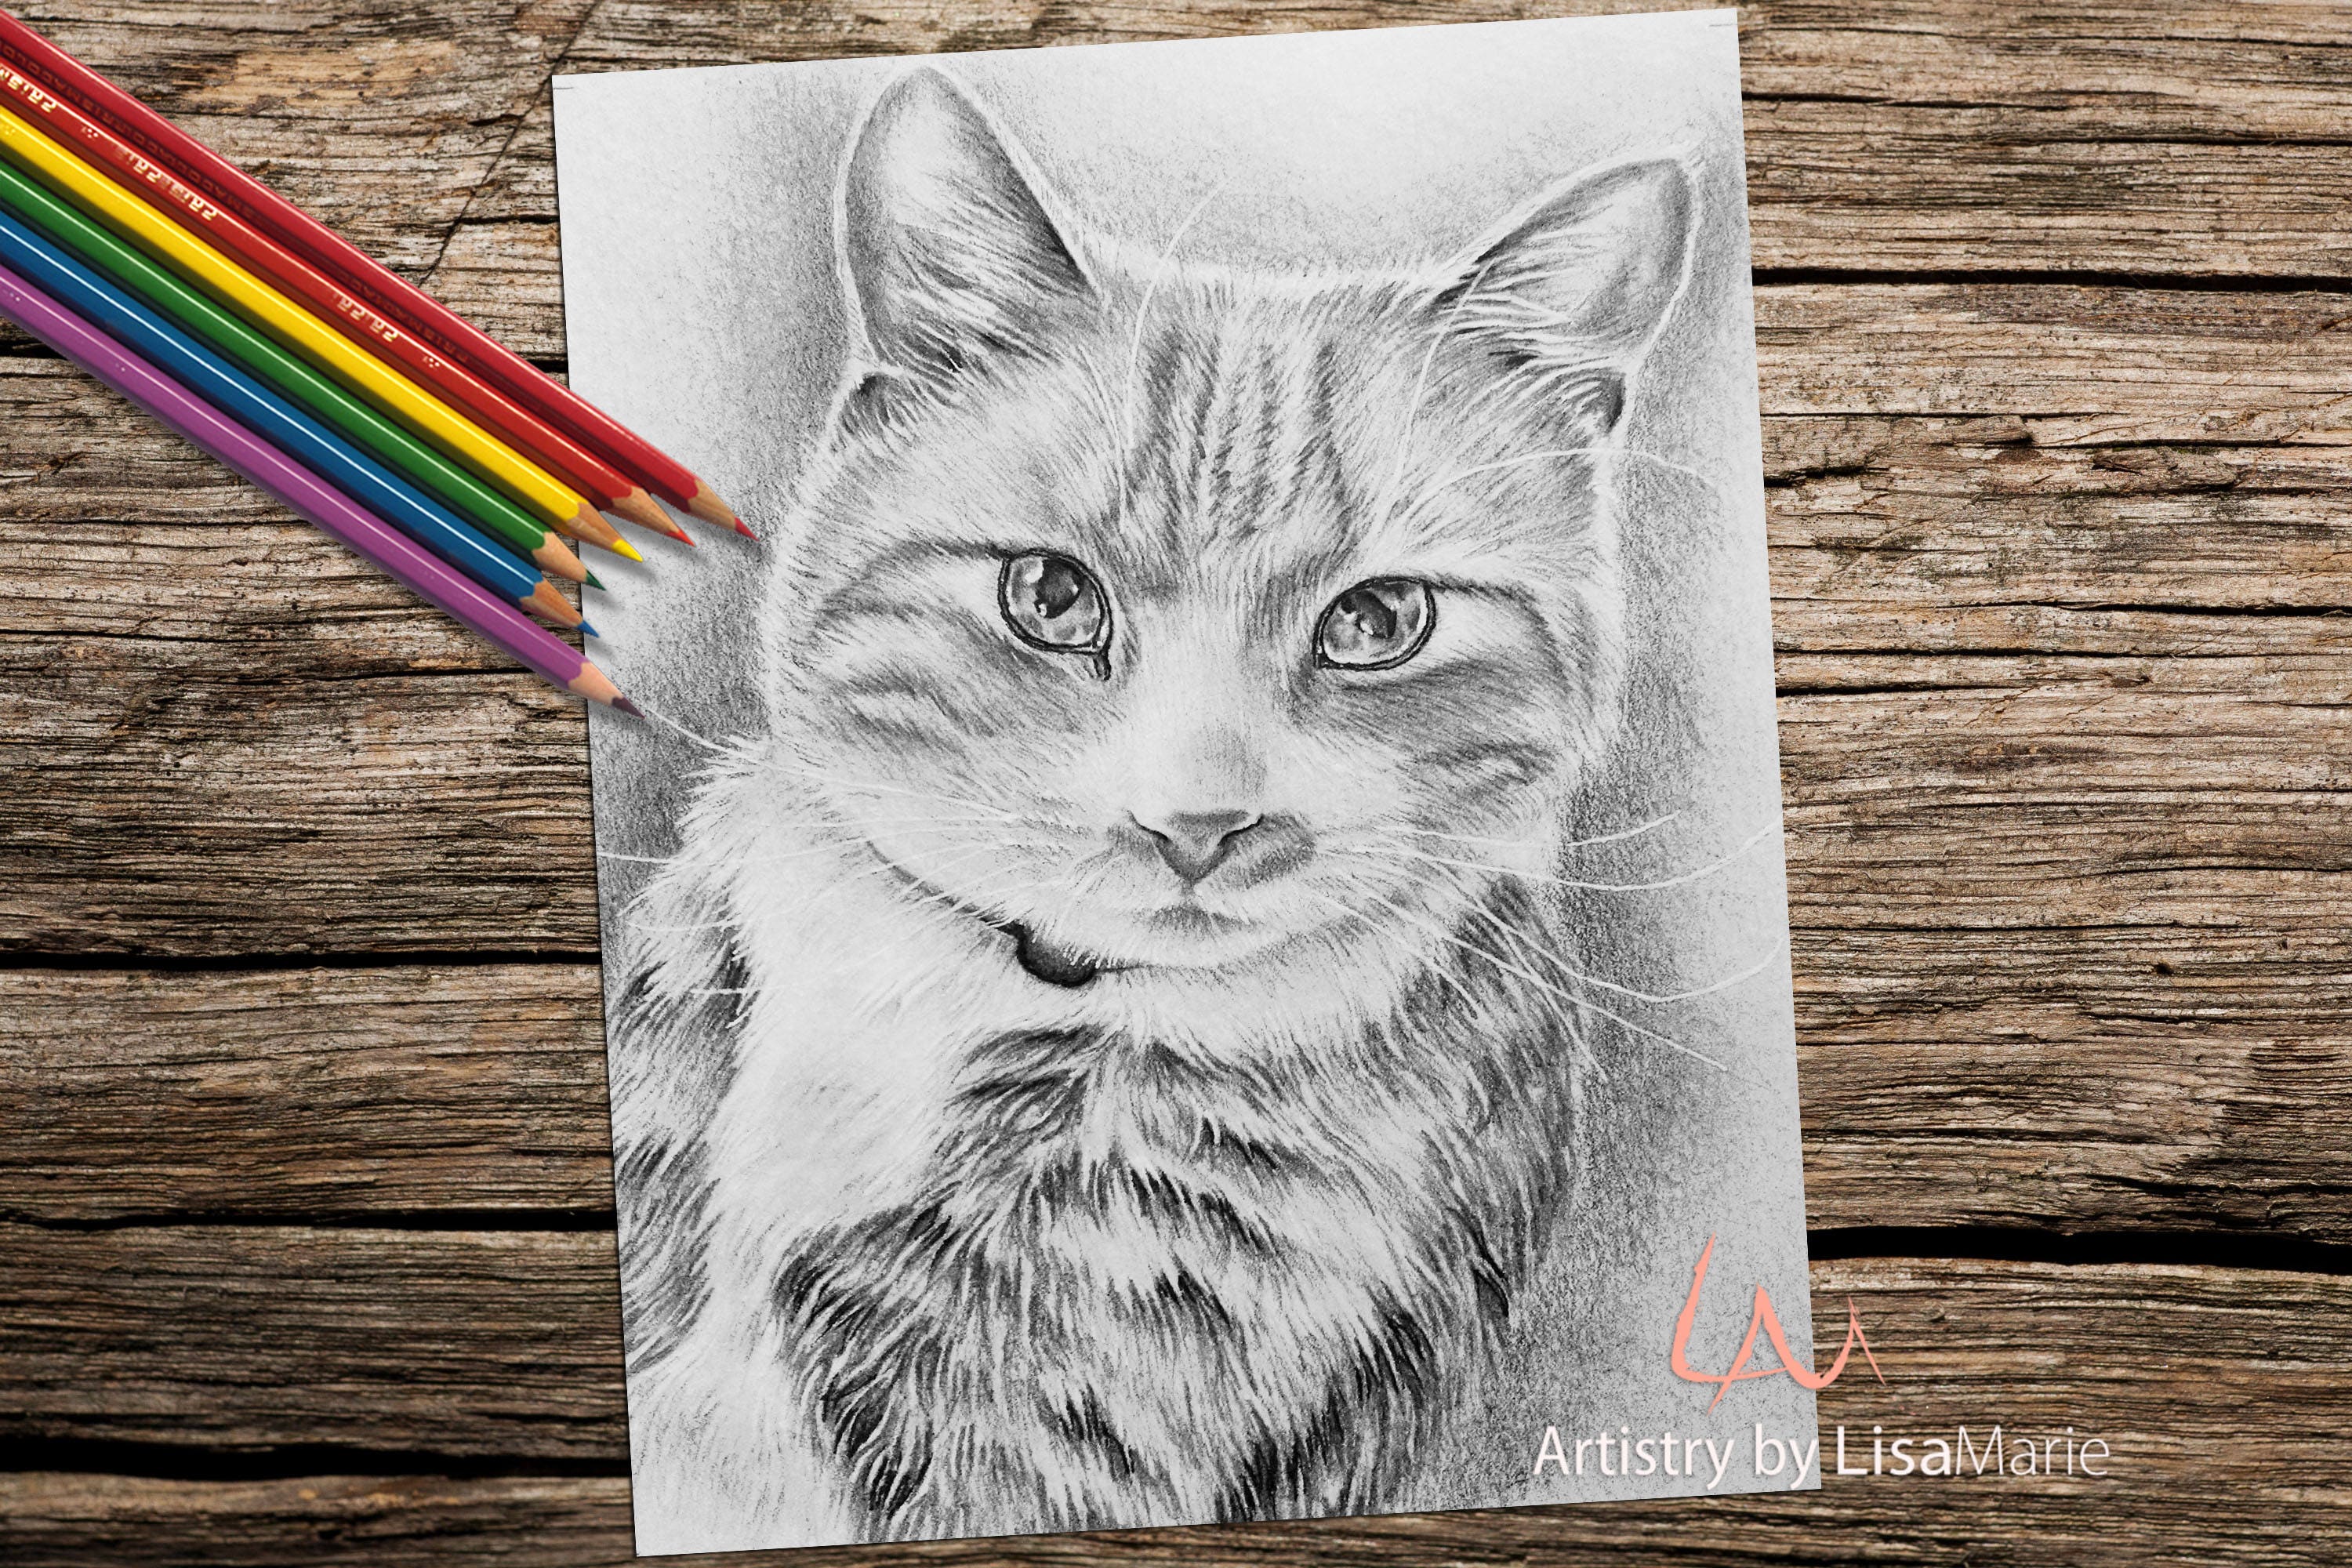 Cat Coloring Book For Adults And Older Children Decorative Cat Handdrawn  Vector Illustrations Decorated With Decorative Buttons For Sewing Stock  Illustration - Download Image Now - iStock